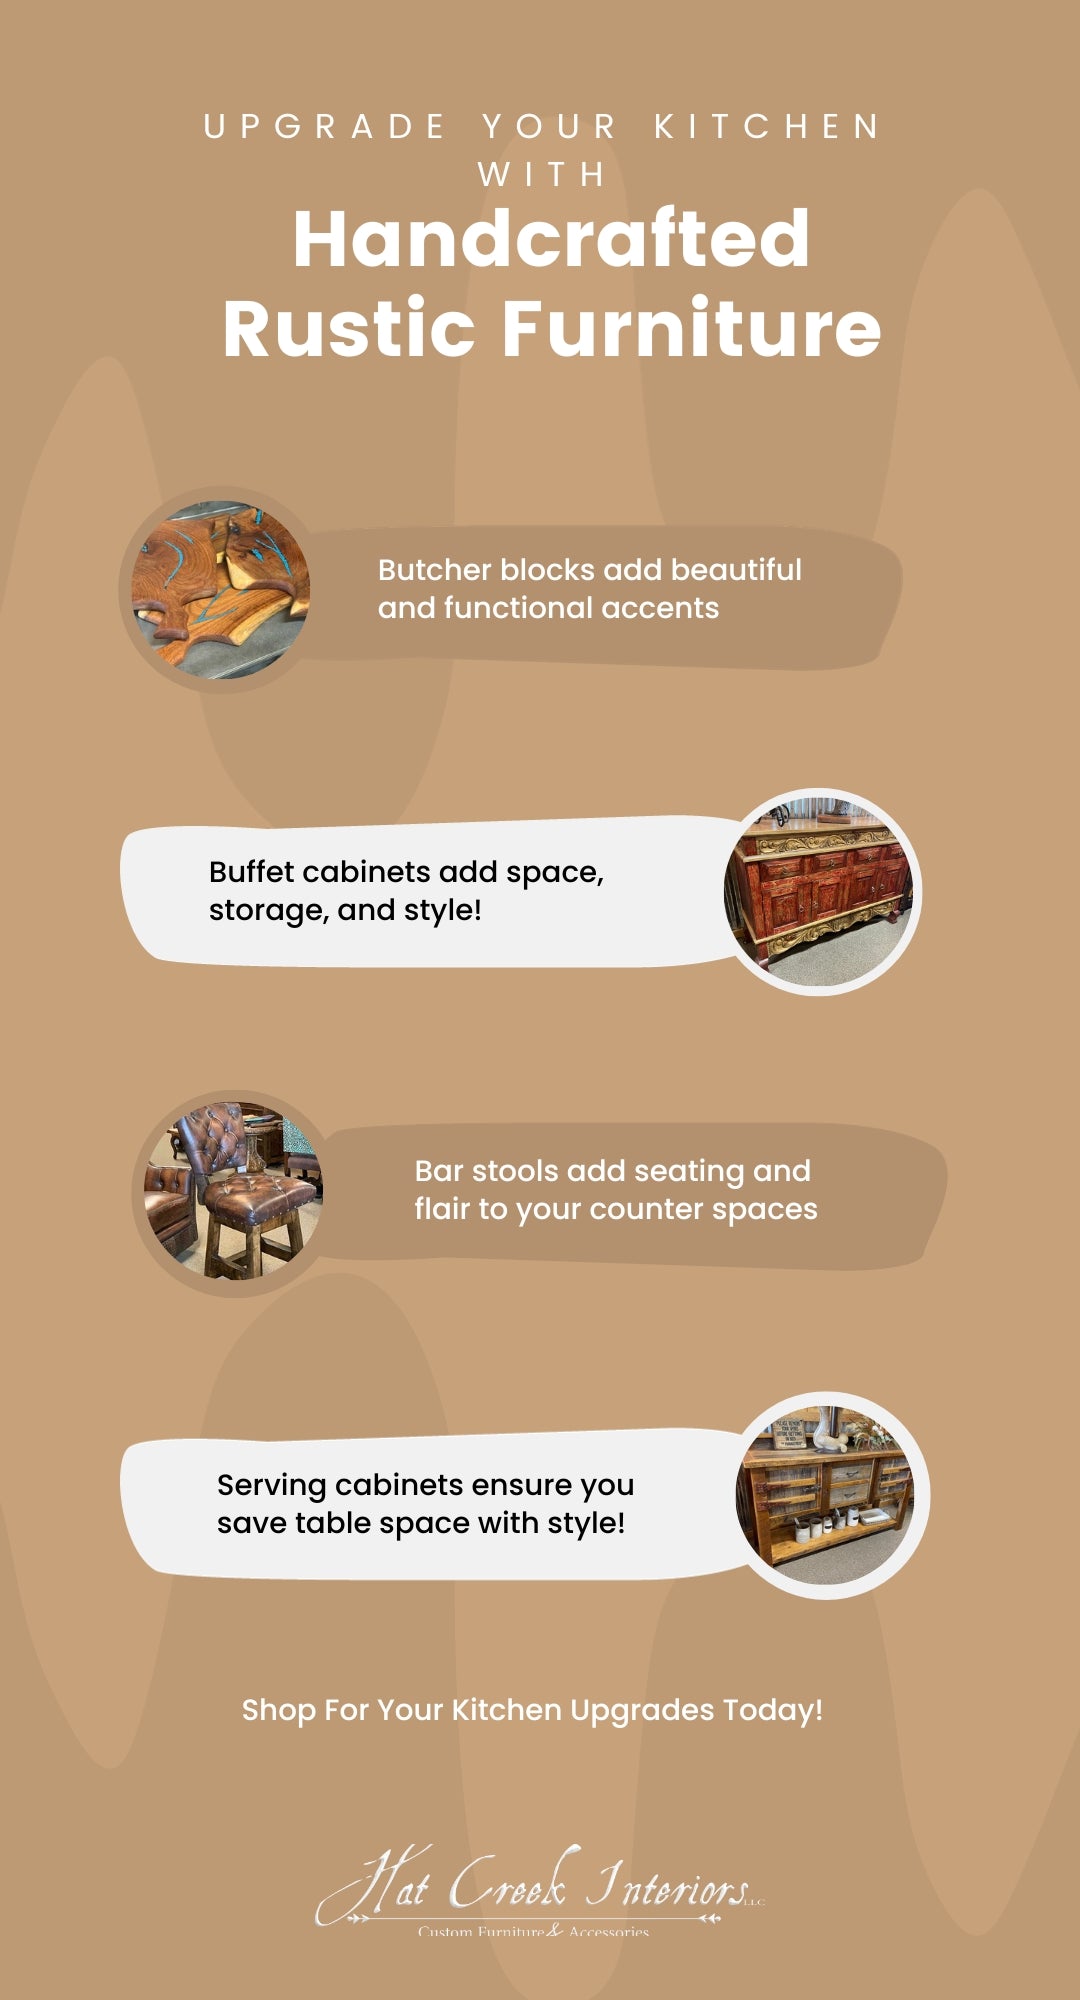 Upgrade Your Kitchen with Handcrafted Rustic Furniture Infographic